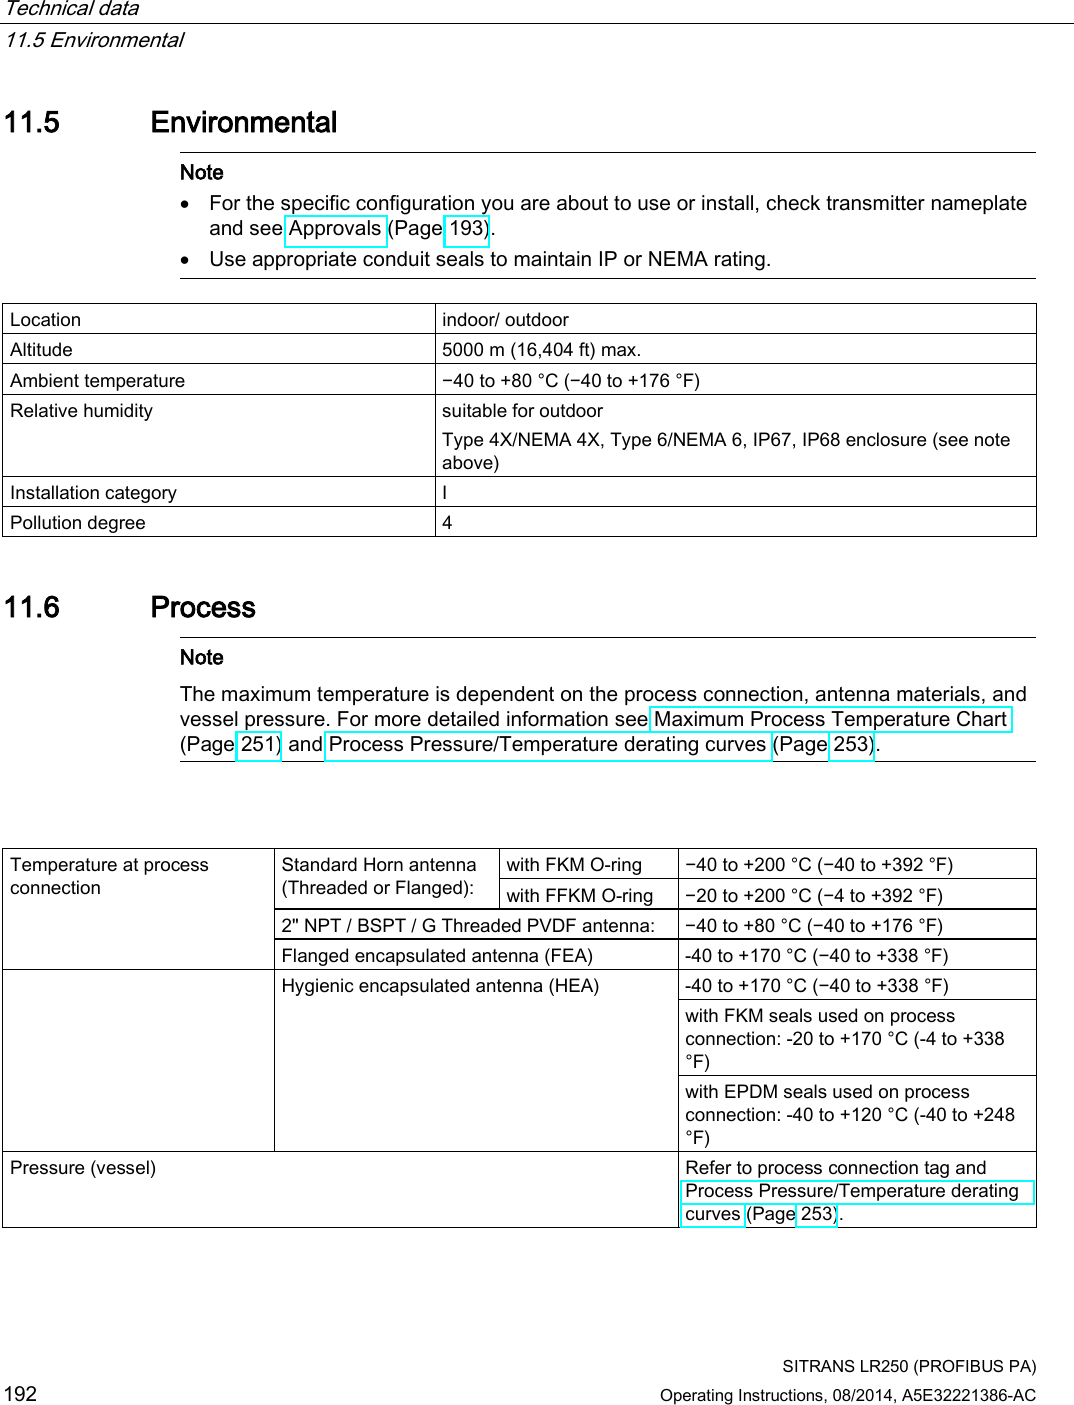 Technical data   11.5 Environmental  SITRANS LR250 (PROFIBUS PA) 192 Operating Instructions, 08/2014, A5E32221386-AC 11.5 Environmental  Note • For the specific configuration you are about to use or install, check transmitter nameplate and see Approvals (Page 193).  • Use appropriate conduit seals to maintain IP or NEMA rating.  Location  indoor/ outdoor Altitude 5000 m (16,404 ft) max. Ambient temperature −40 to +80 °C (−40 to +176 °F) Relative humidity suitable for outdoor  Type 4X/NEMA 4X, Type 6/NEMA 6, IP67, IP68 enclosure (see note above) Installation category  I Pollution degree  4  11.6 Process  Note The maximum temperature is dependent on the process connection, antenna materials, and vessel pressure. For more detailed information see Maximum Process Temperature Chart (Page 251) and Process Pressure/Temperature derating curves (Page 253).     Temperature at process connection Standard Horn antenna (Threaded or Flanged):  with FKM O-ring  −40 to +200 °C (−40 to +392 °F) with FFKM O-ring  −20 to +200 °C (−4 to +392 °F) 2&quot; NPT / BSPT / G Threaded PVDF antenna: −40 to +80 °C (−40 to +176 °F) Flanged encapsulated antenna (FEA)  -40 to +170 °C (−40 to +338 °F)  Hygienic encapsulated antenna (HEA)  -40 to +170 °C (−40 to +338 °F) with FKM seals used on process connection: -20 to +170 °C (-4 to +338 °F) with EPDM seals used on process connection: -40 to +120 °C (-40 to +248 °F) Pressure (vessel) Refer to process connection tag and Process Pressure/Temperature derating curves (Page 253).   